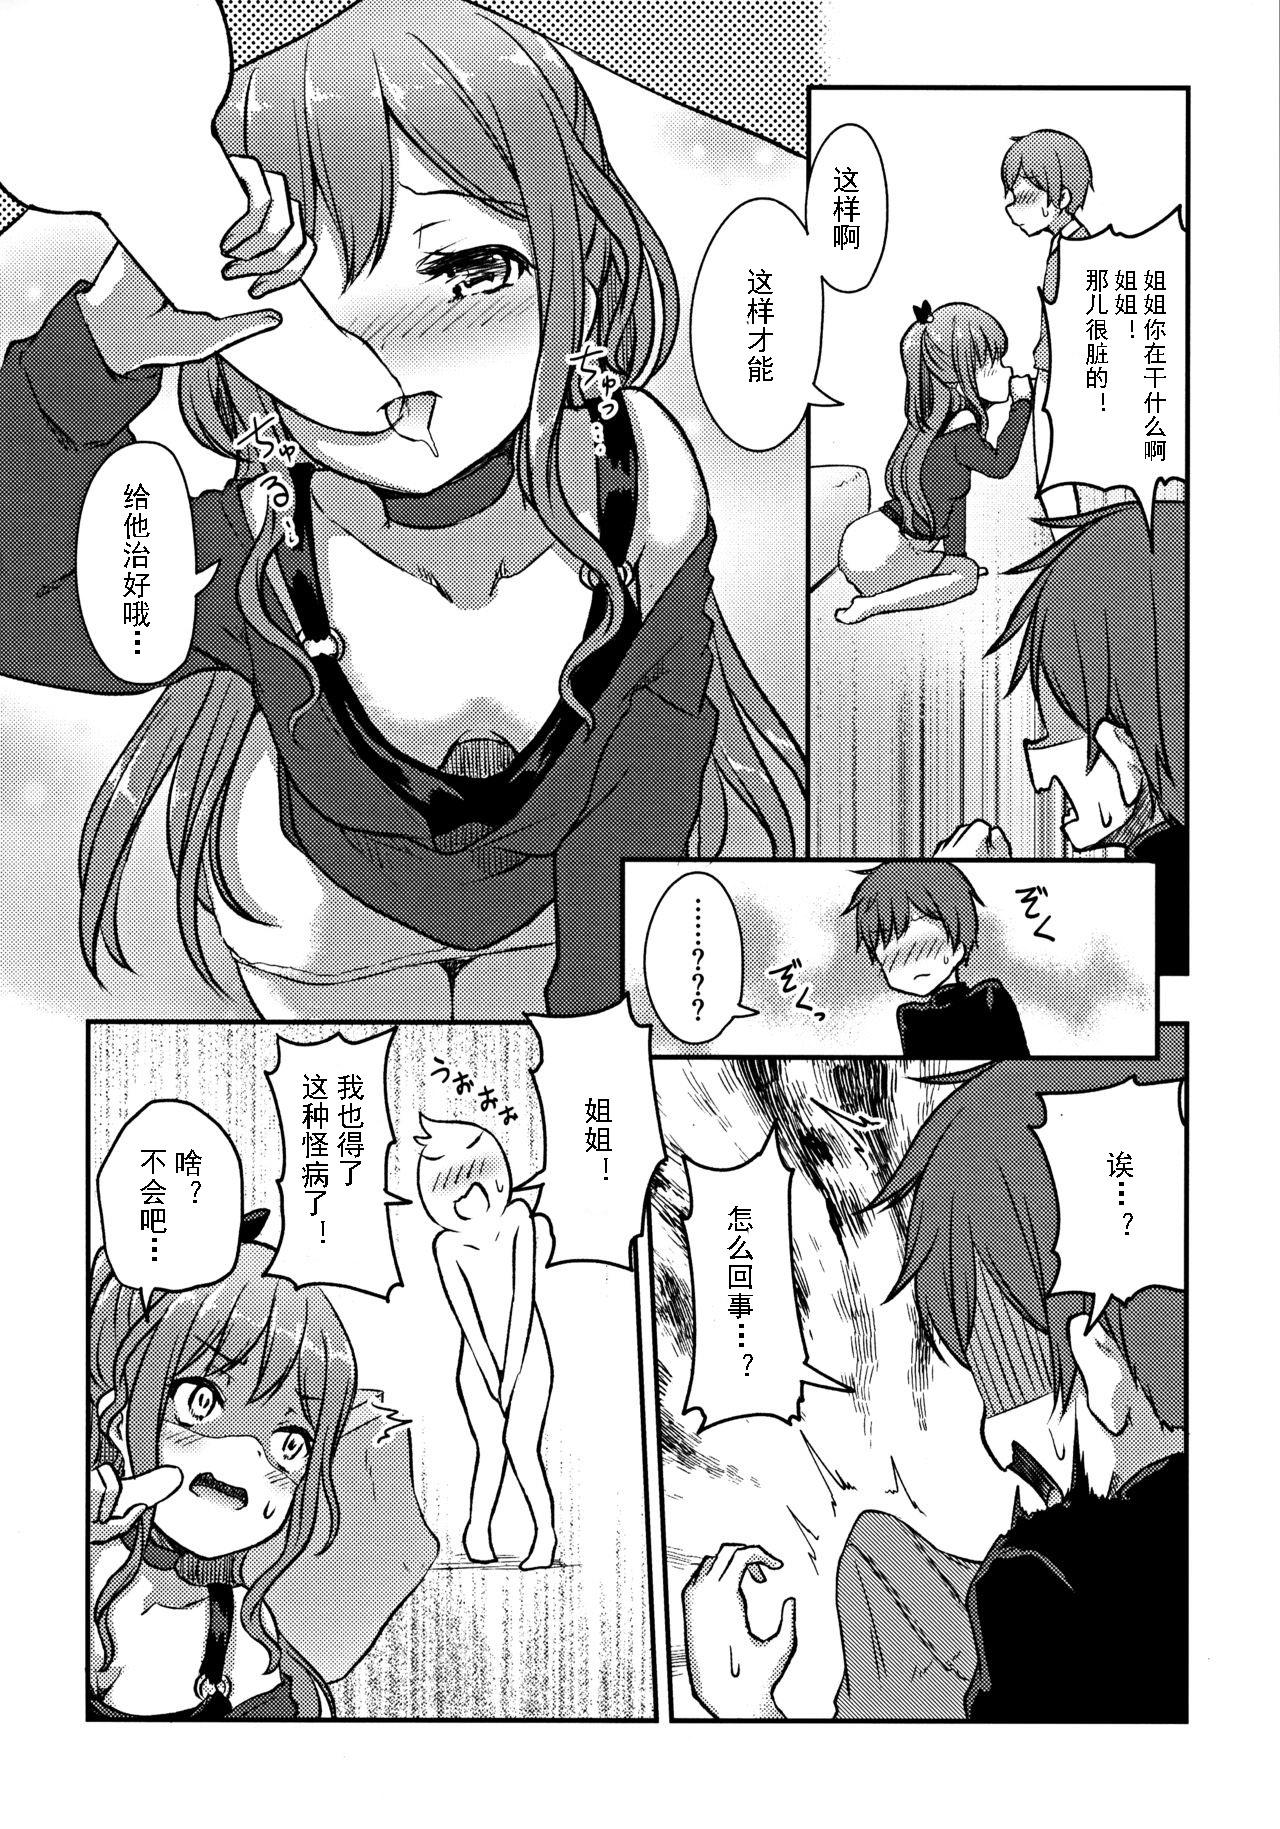 Selfie Hearty Hybrid Household - Bang dream Sola - Page 7